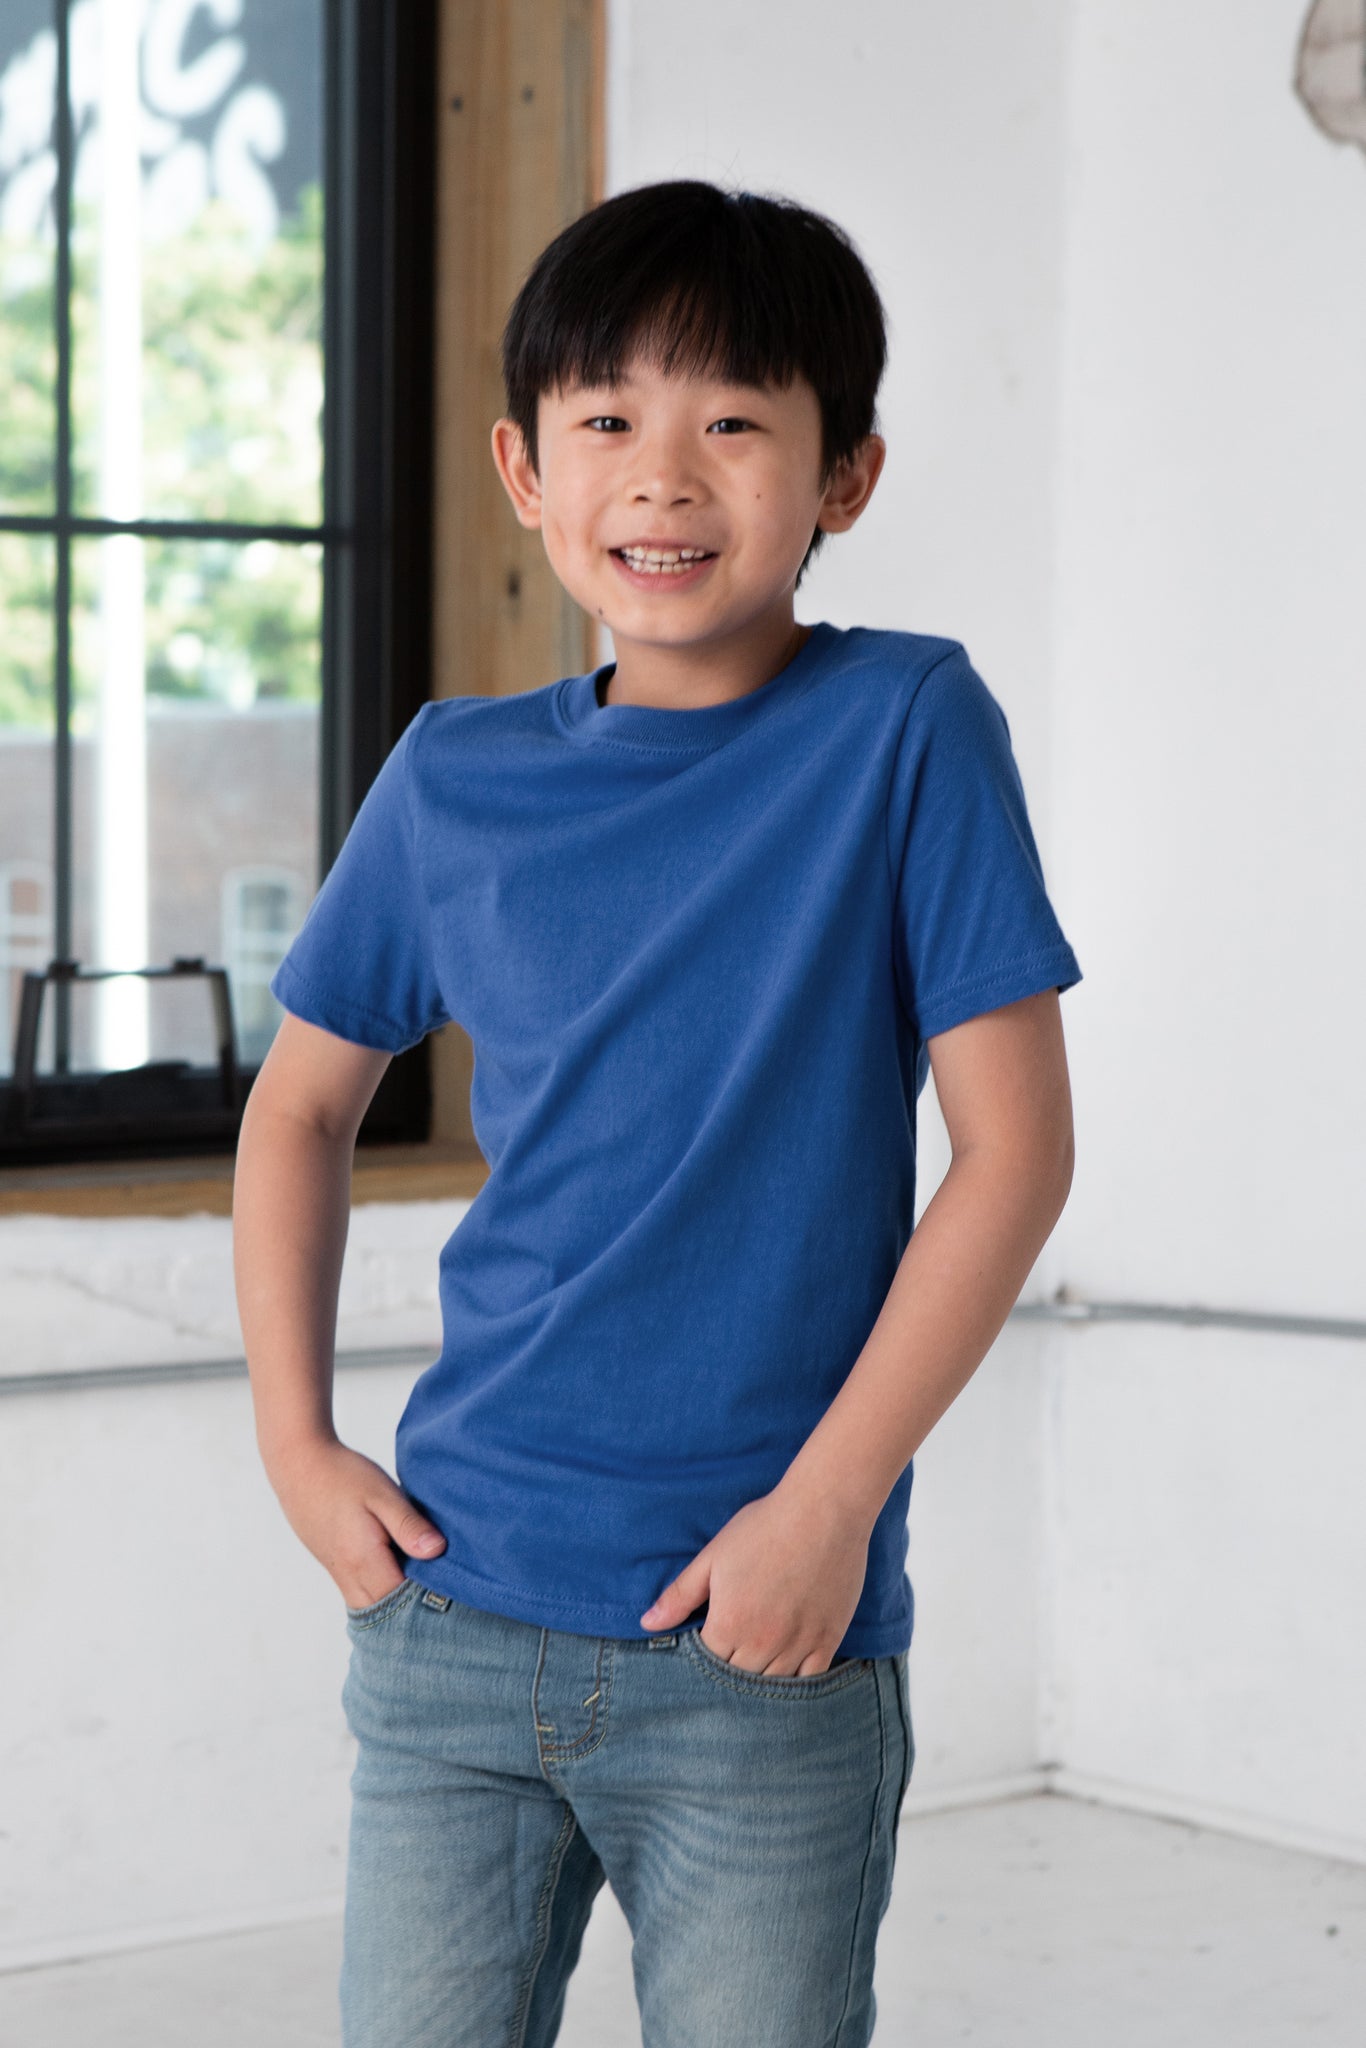 Boy Model wearing GOEX Youth Premium Cotton Tee in Royal